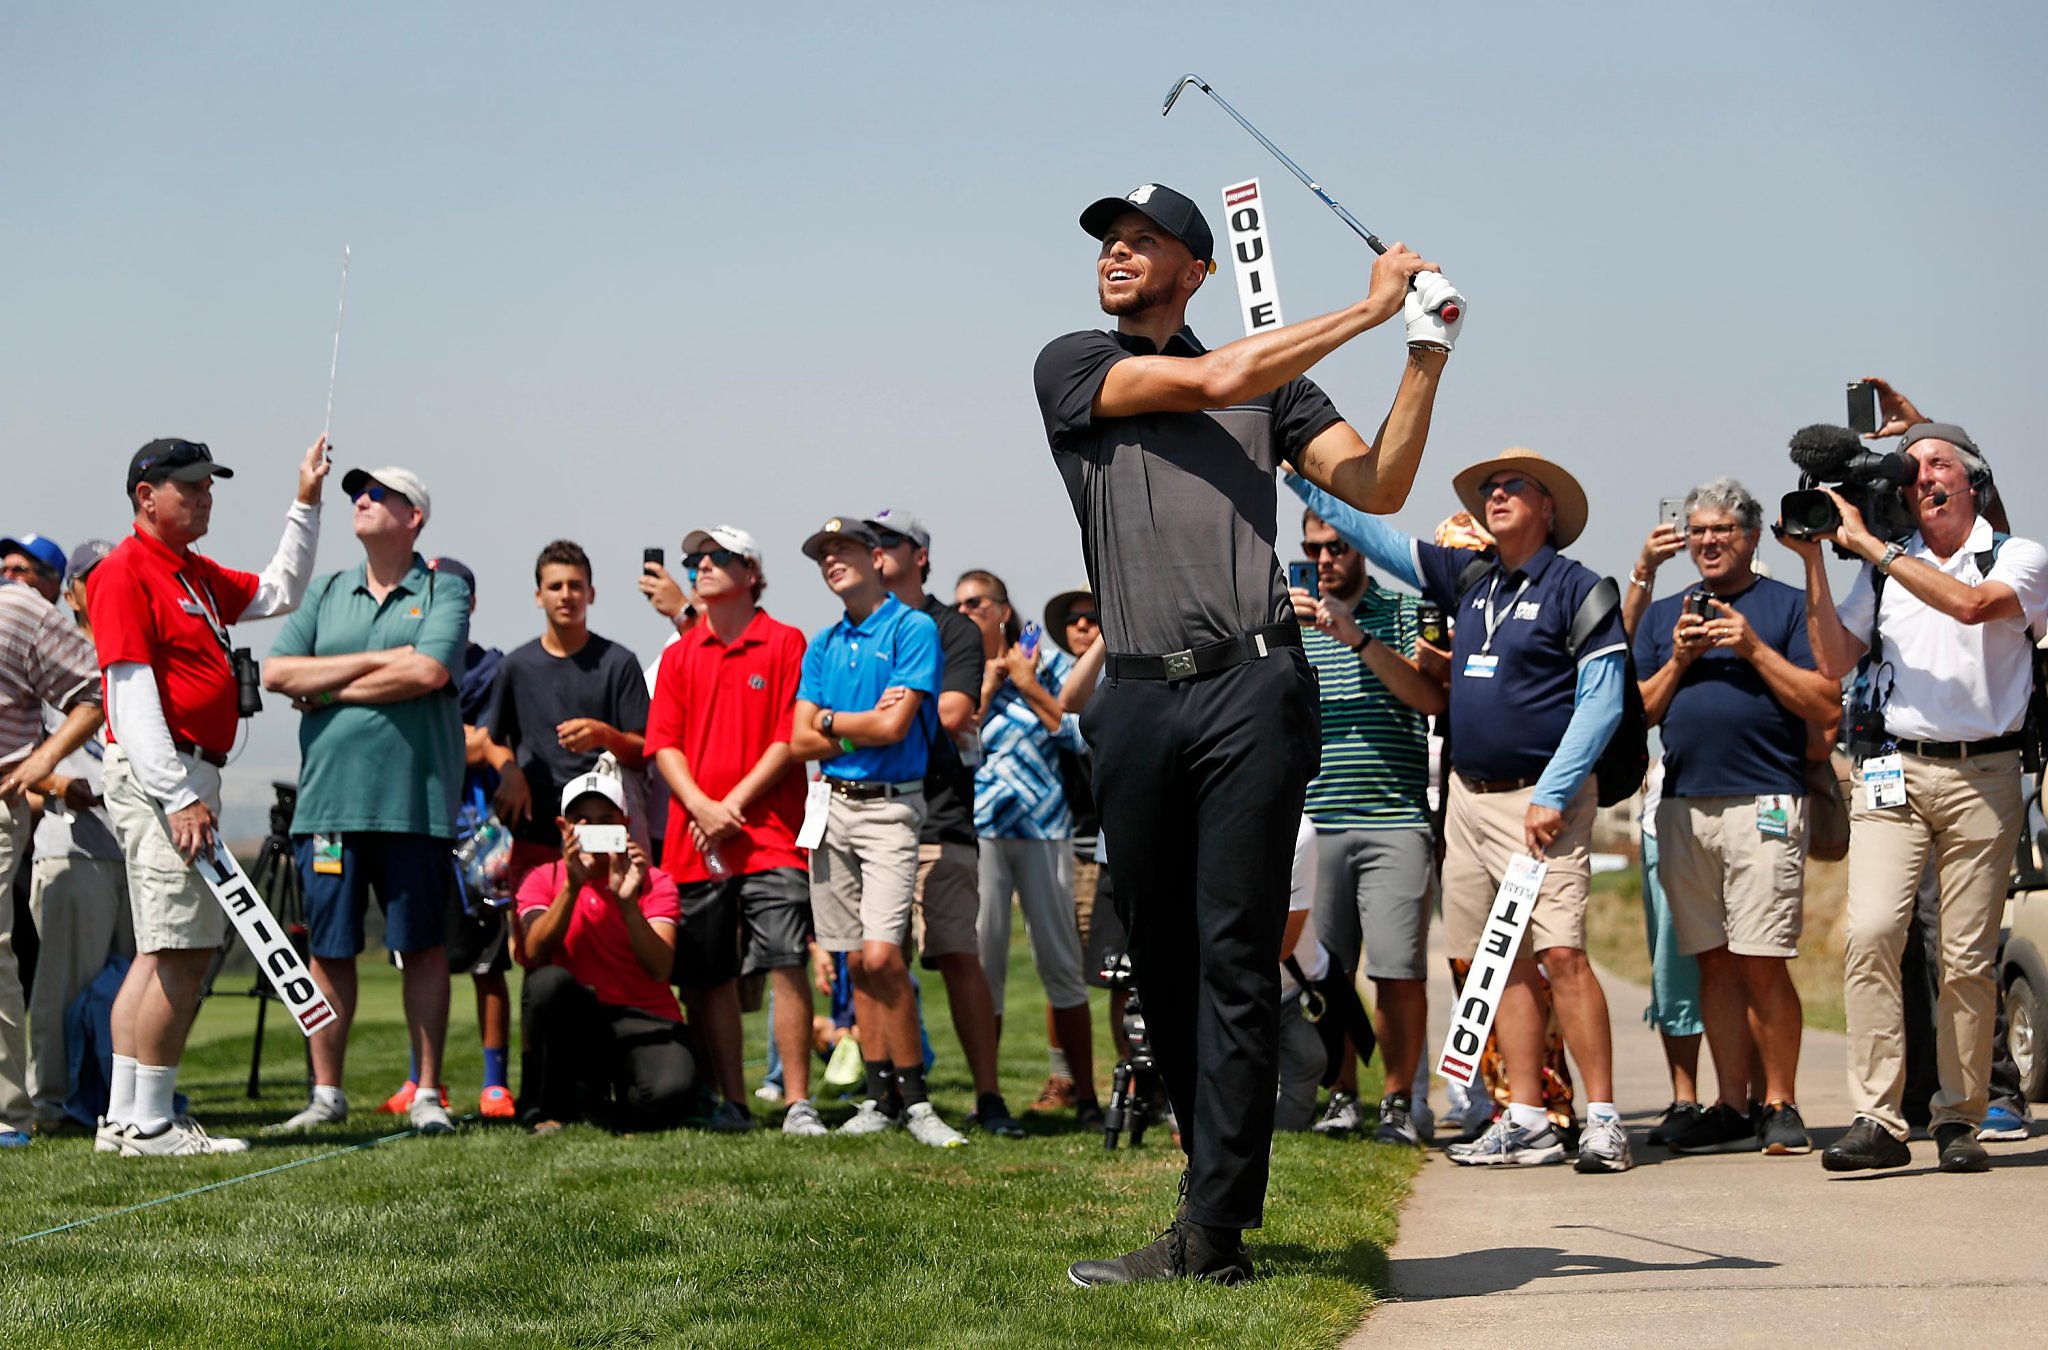 Steph Curry impresses with one-over 71 in professional tournament